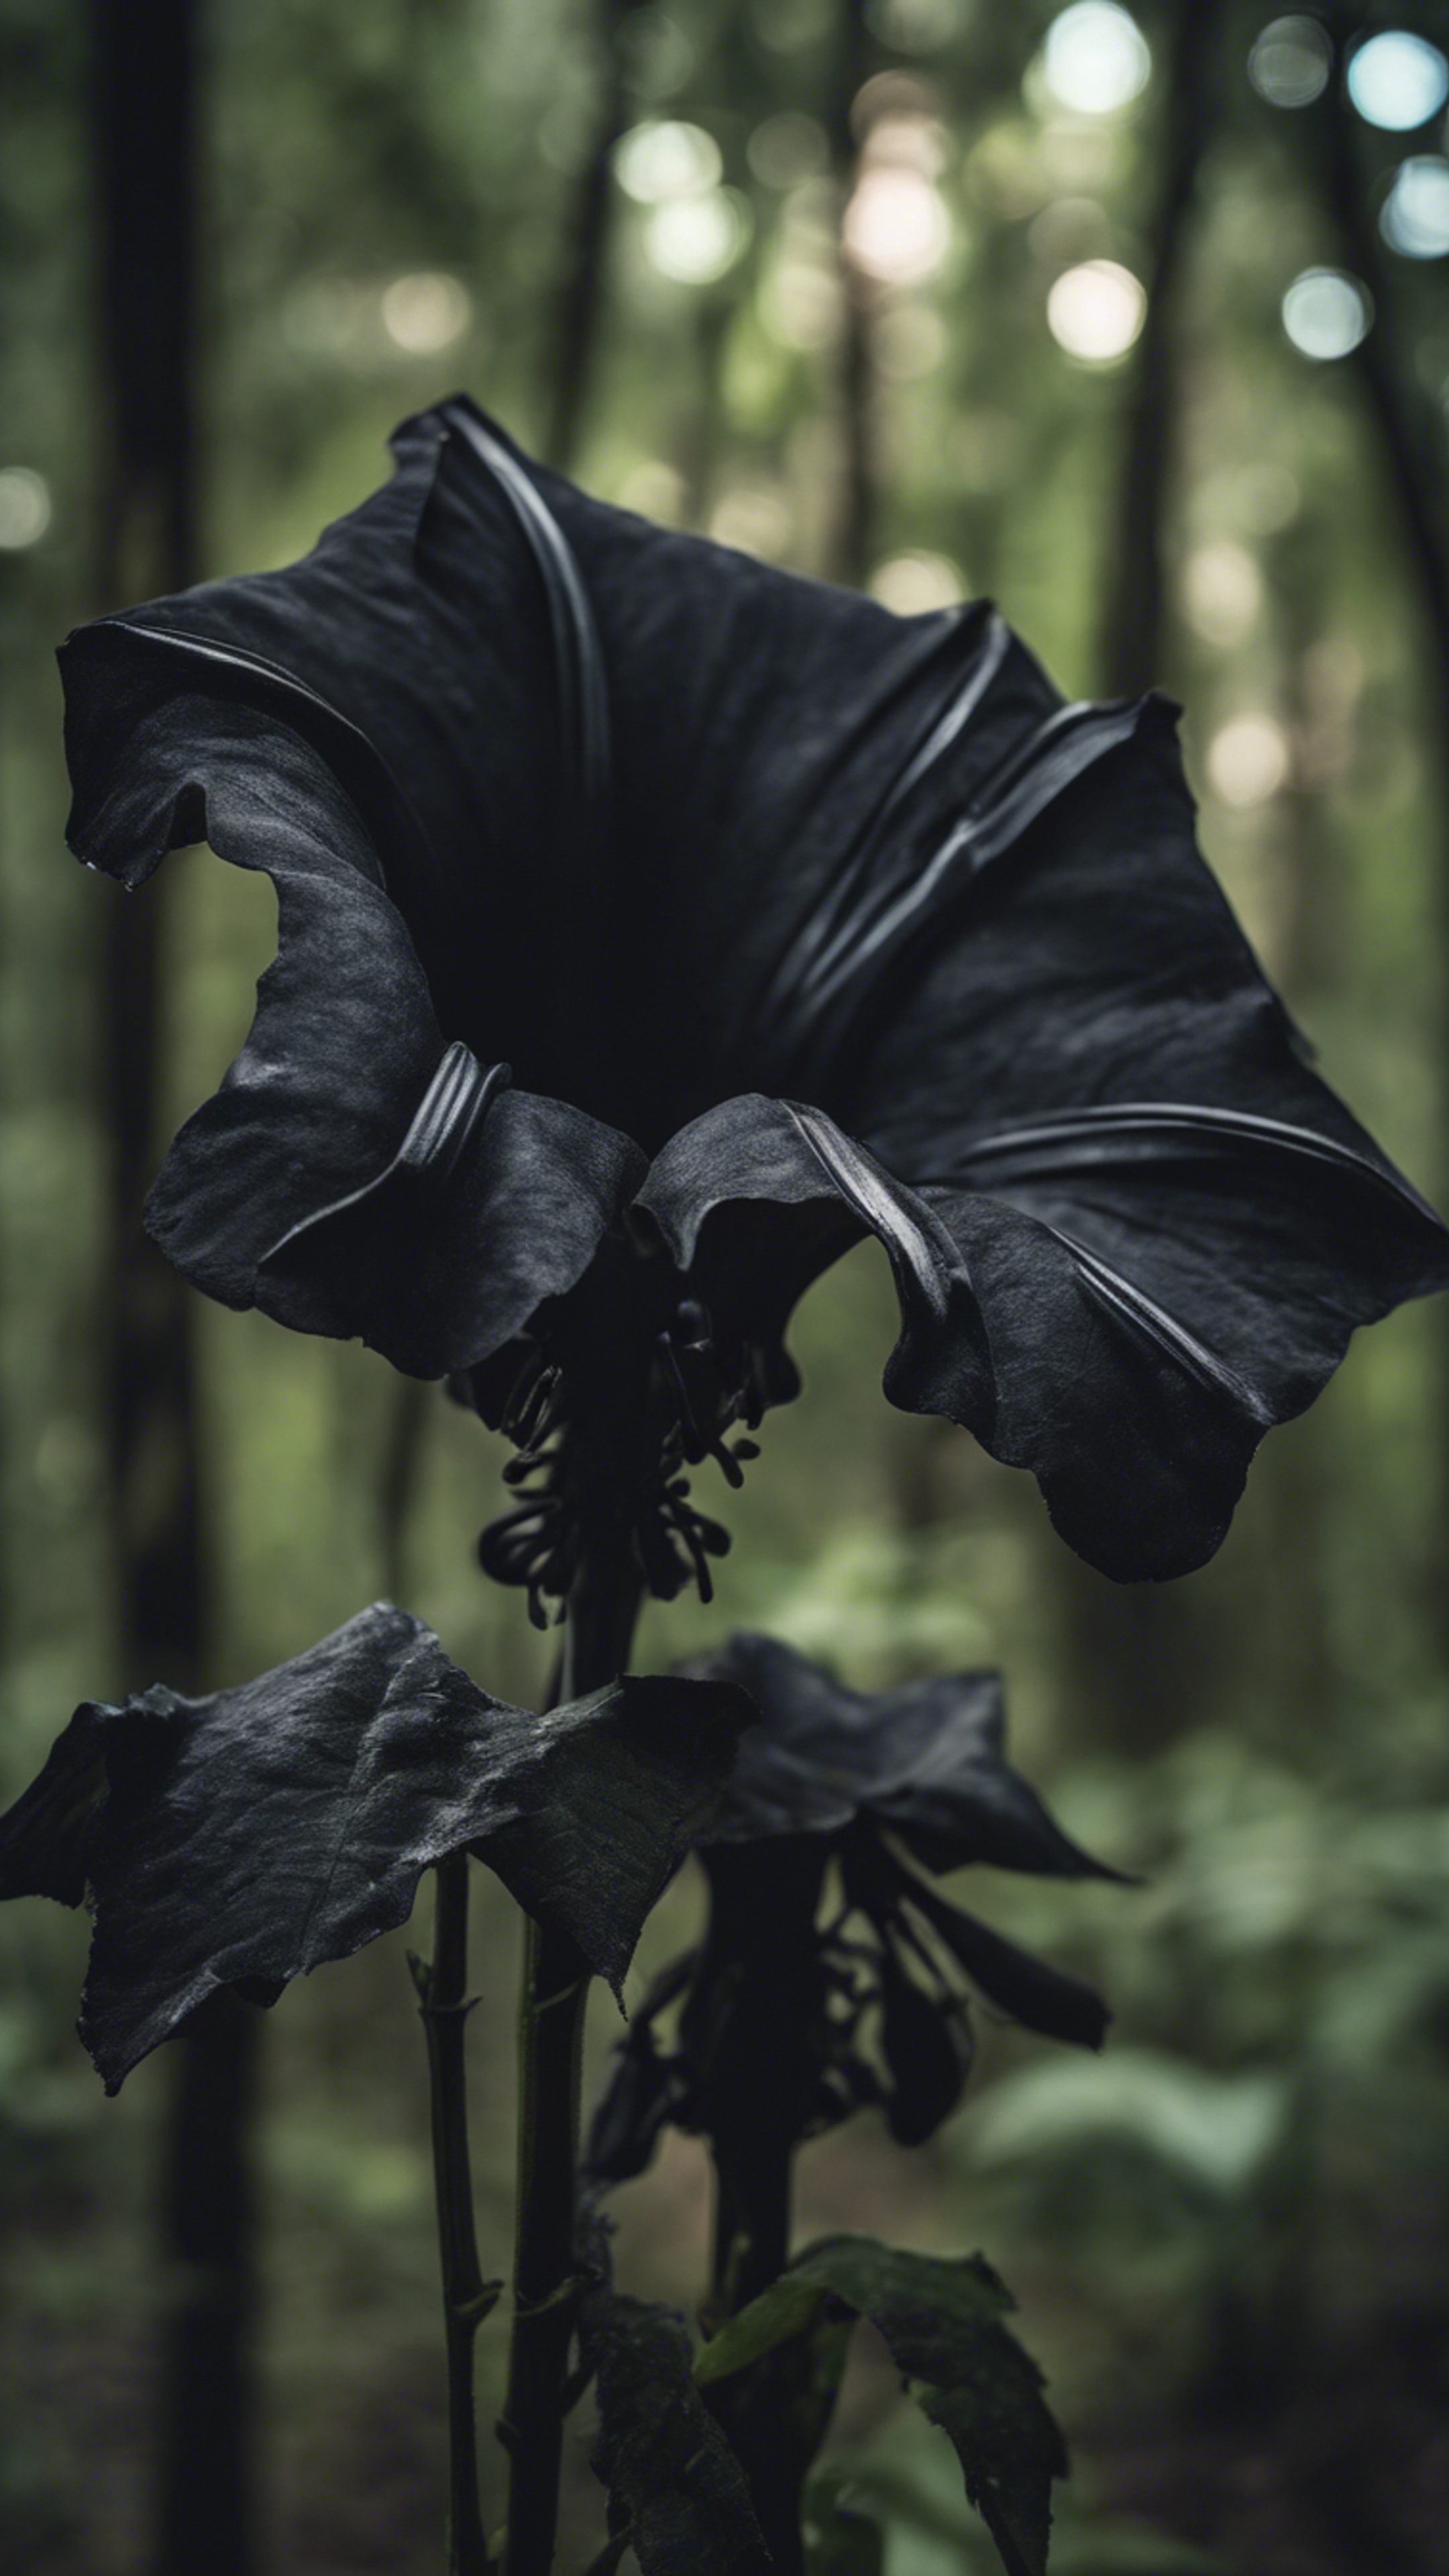 A black trumpet flower evoking an eerie yet captivating atmosphere in the heart of a dense forest. Papel de parede[87d98efd7999478c8568]